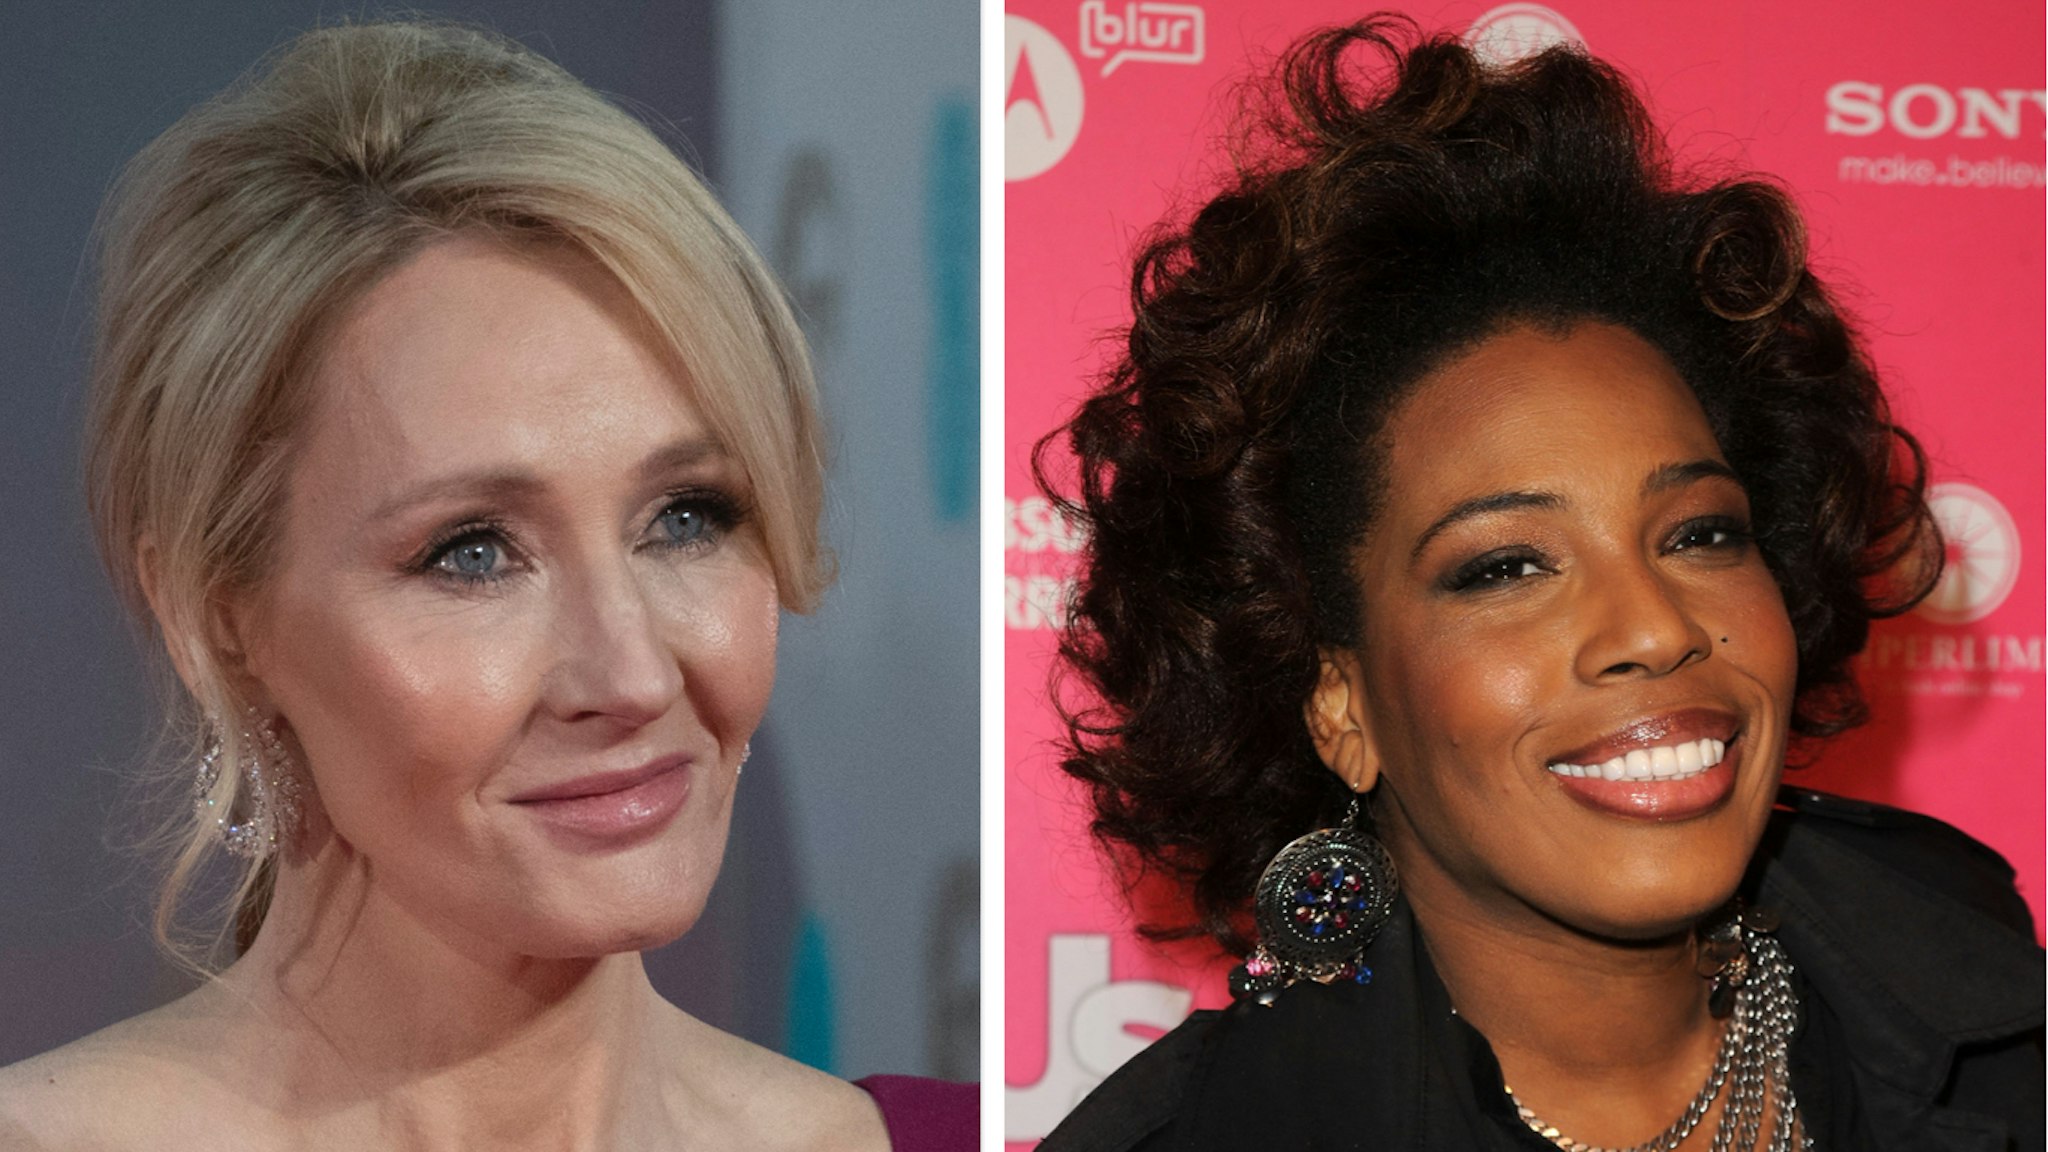 J.K. Rowling attends the 70th EE British Academy Film Awards (BAFTA) at Royal Albert Hall on February 12, 2017 in London, England. Singer Macy Gray arrives at the Us Weekly Hot Hollywood Style Issue celebration held at Drai's Hollywood at the W Hollywood Hotel on April 22, 2010 in Hollywood, California.